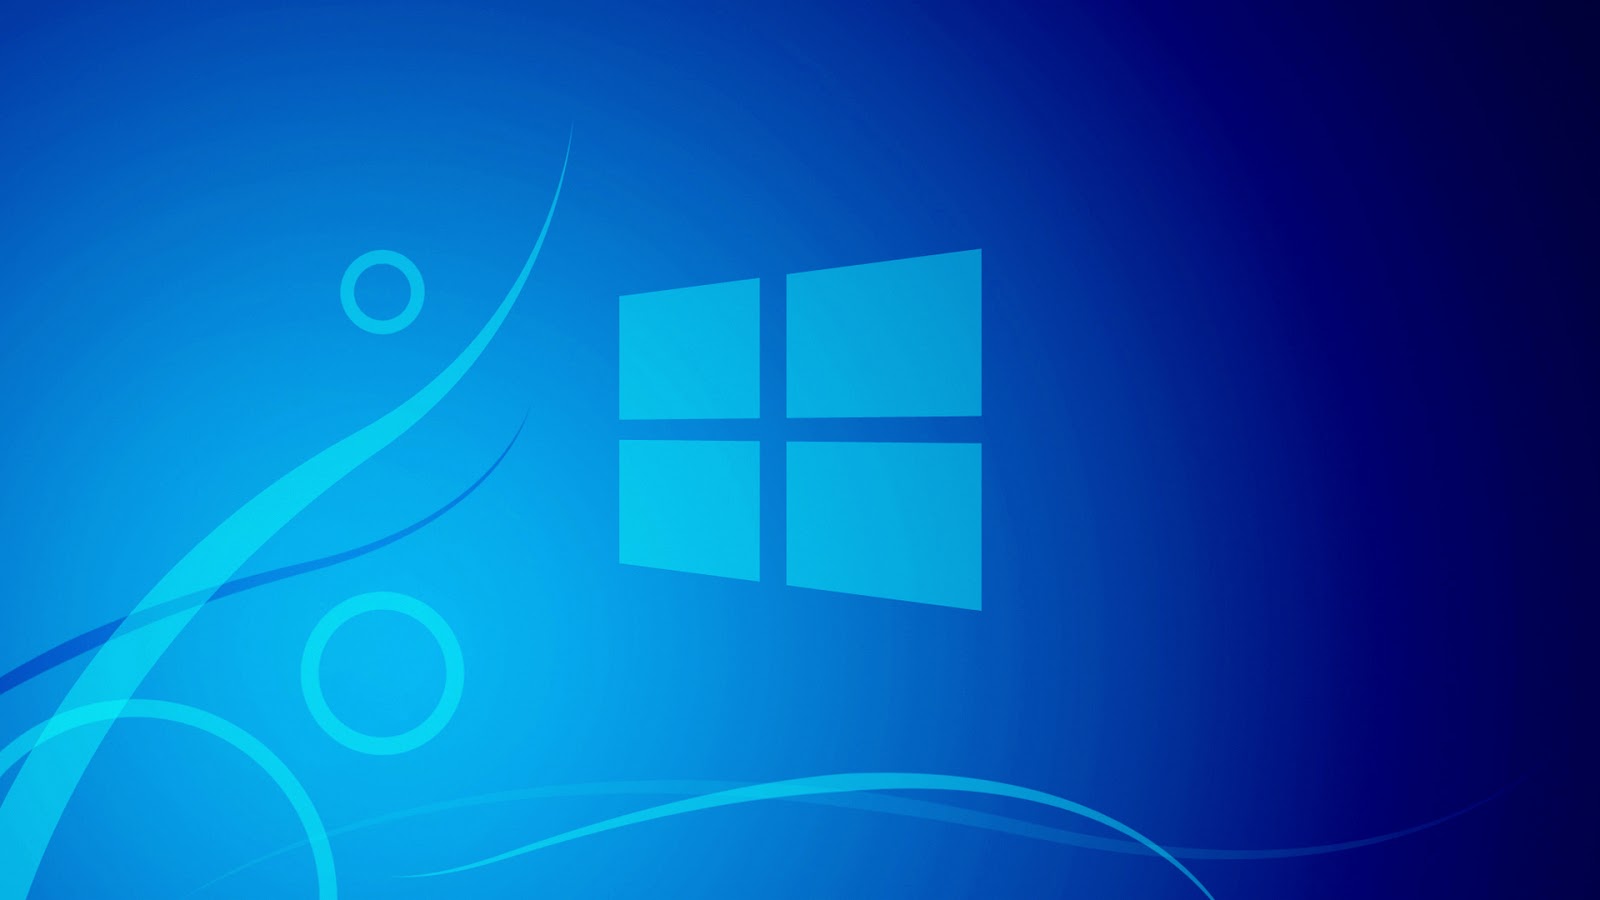 Hd 1080p wallpapers for windows 8